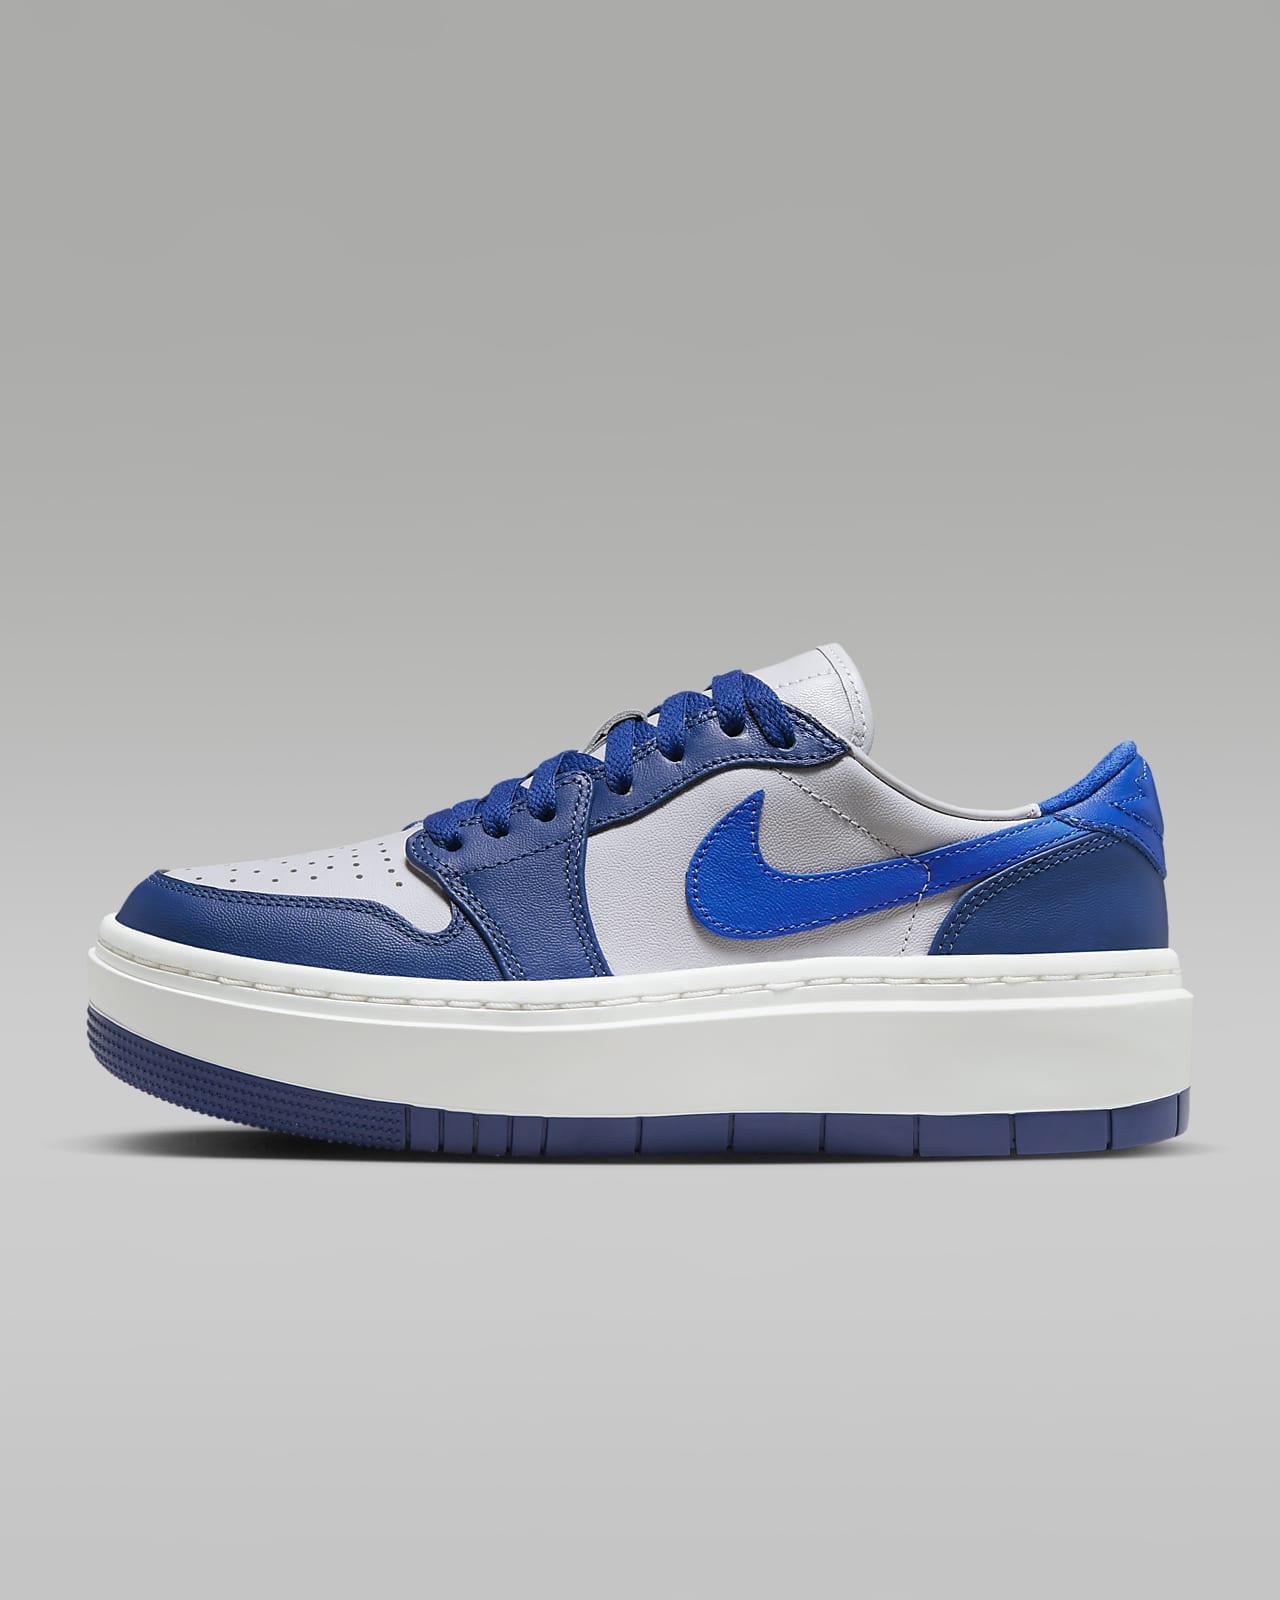 The Perfect Fit: Air Jordan 1 Elevate Low Womens Shoes – Elevate Your Style Game Instantly!